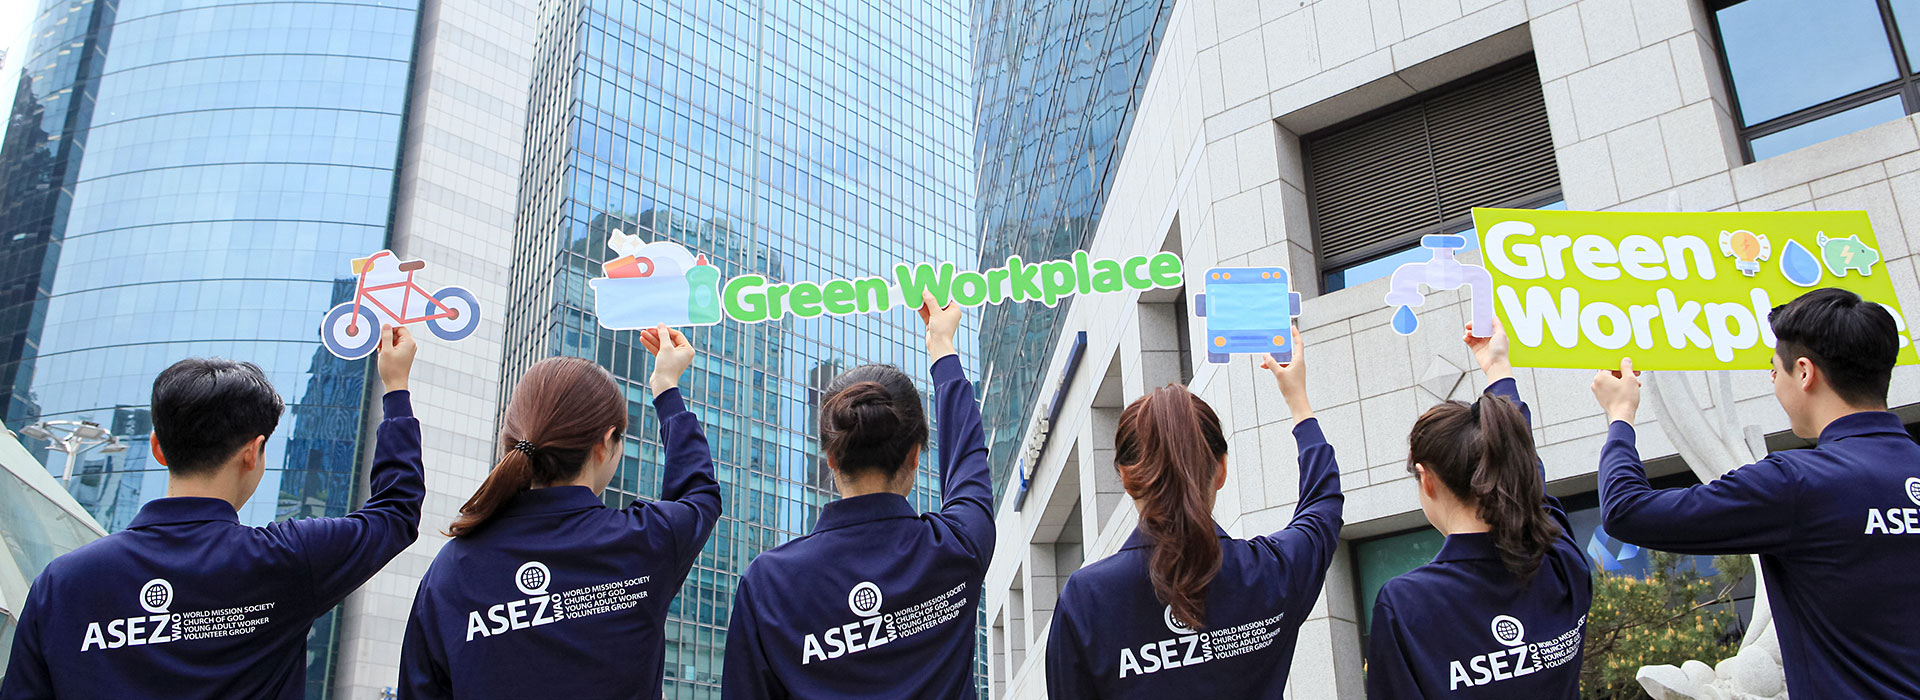 ASEZ WAO Green Workplace Campaign